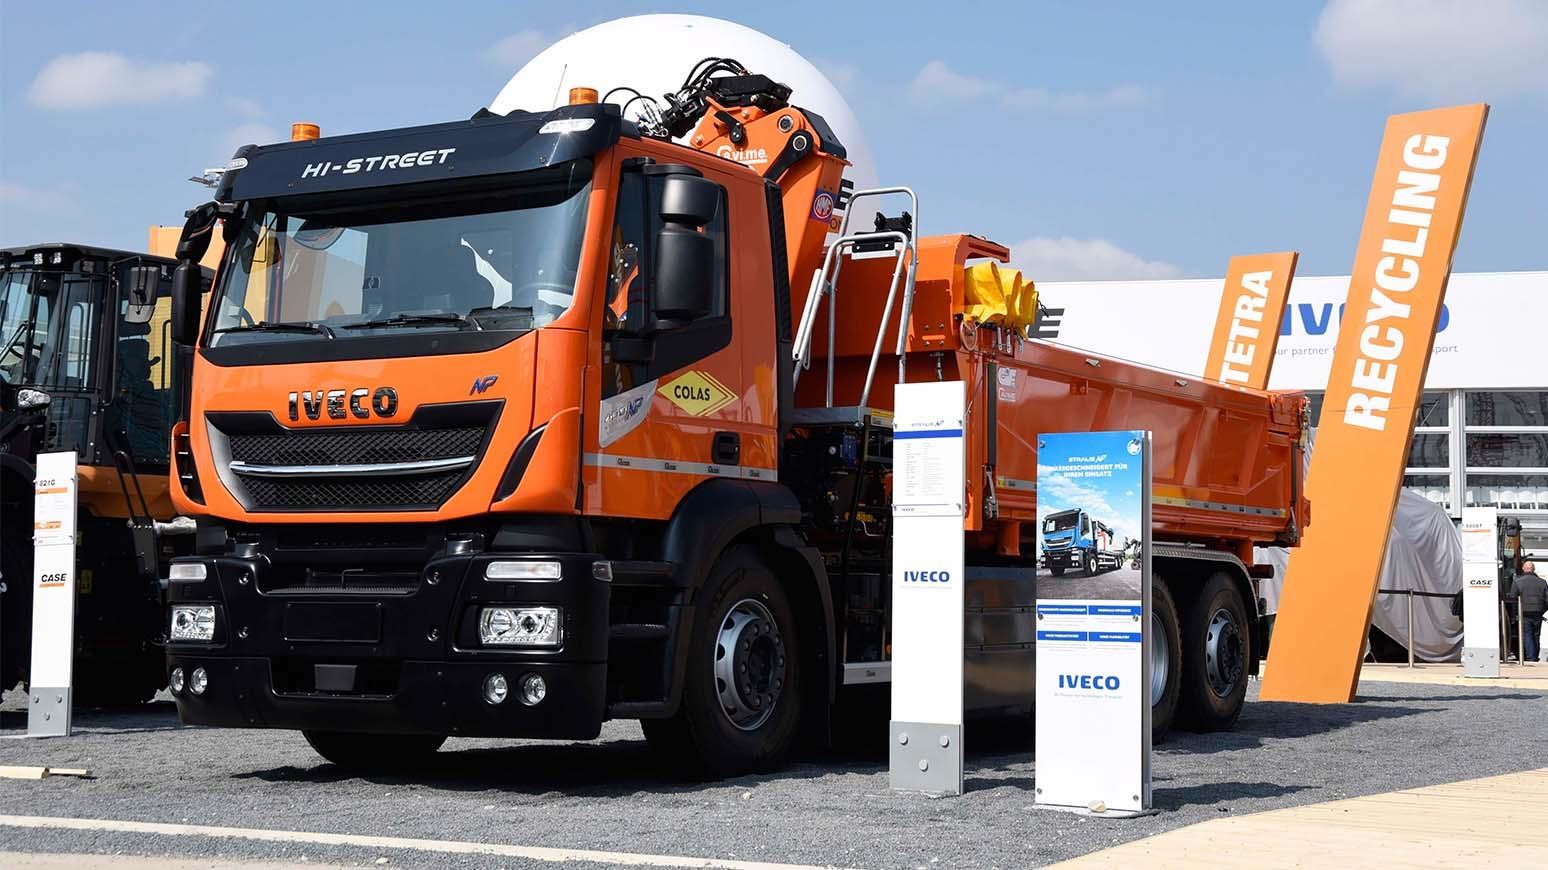 IVECO Highlights Trucks For The Construction Industry At Bauma 2019